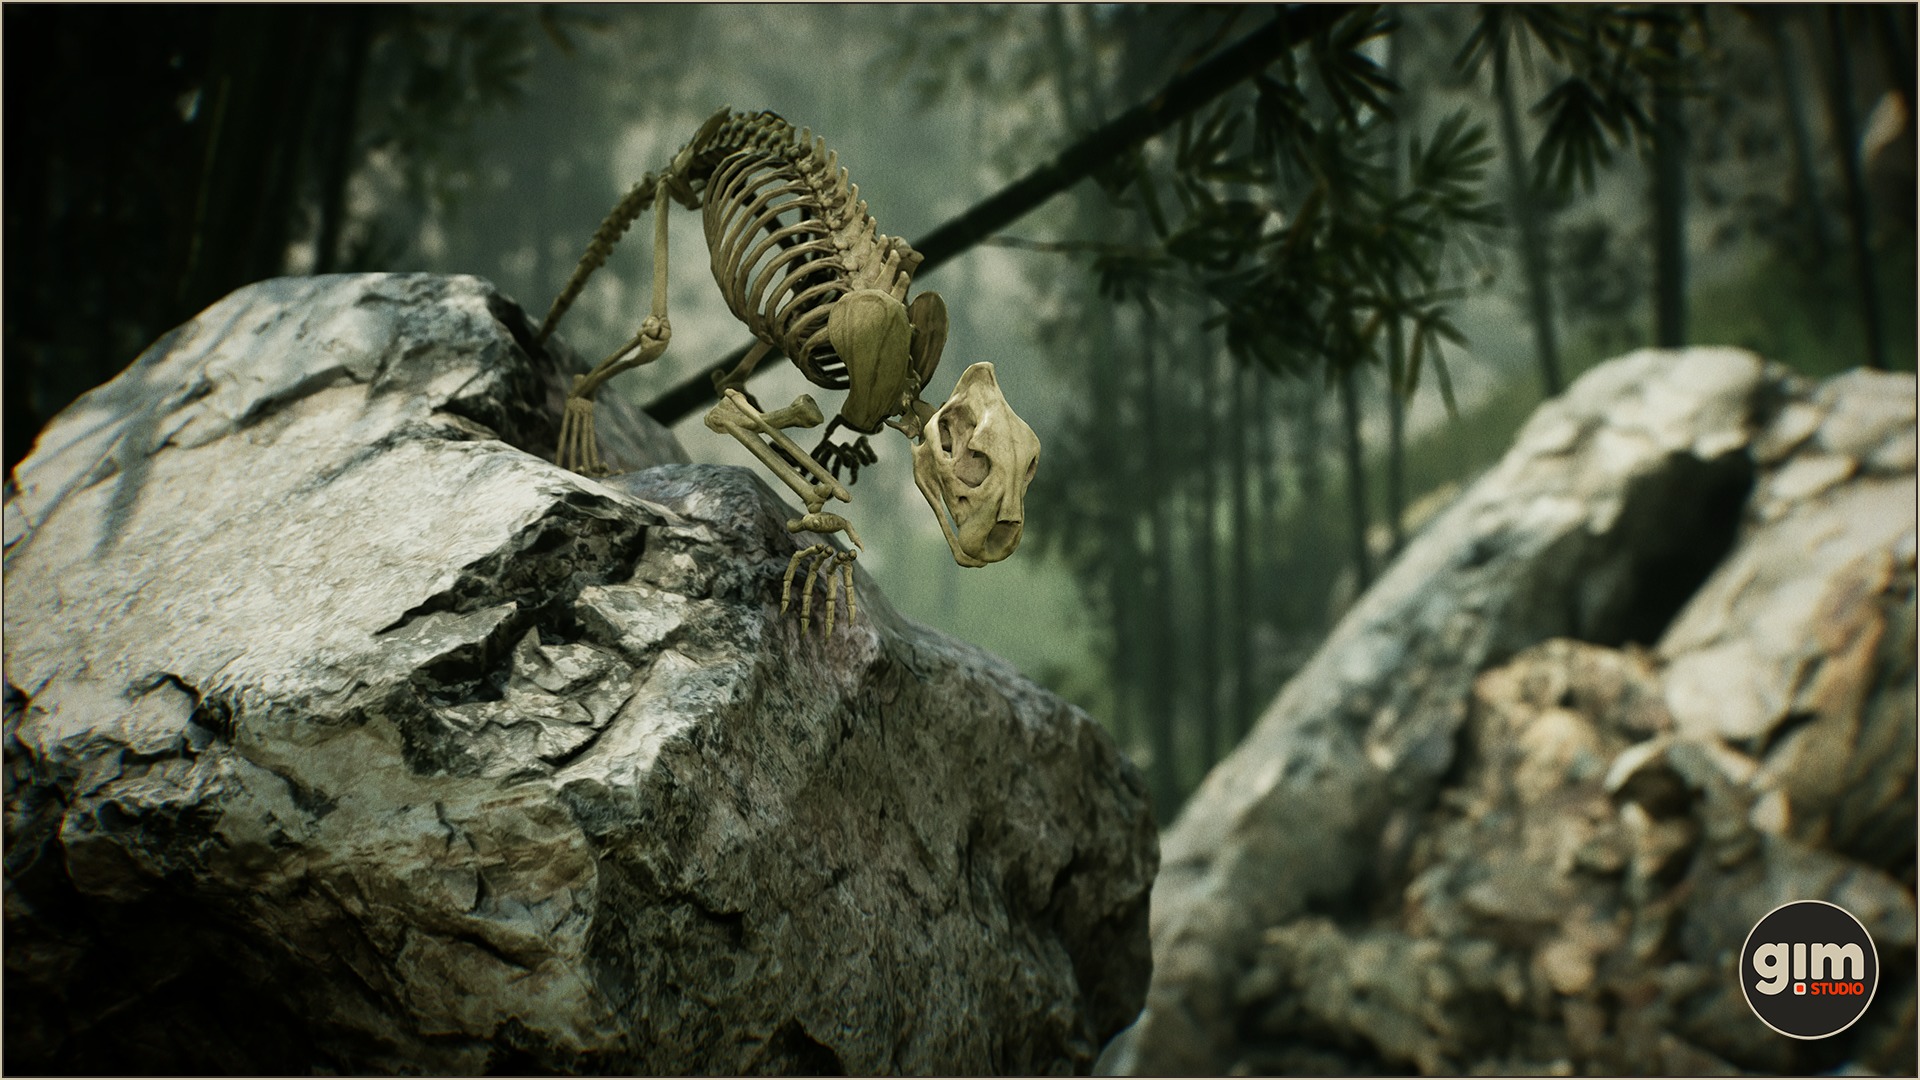 Bones of young tiger jumping down from a rock, this looks really strange